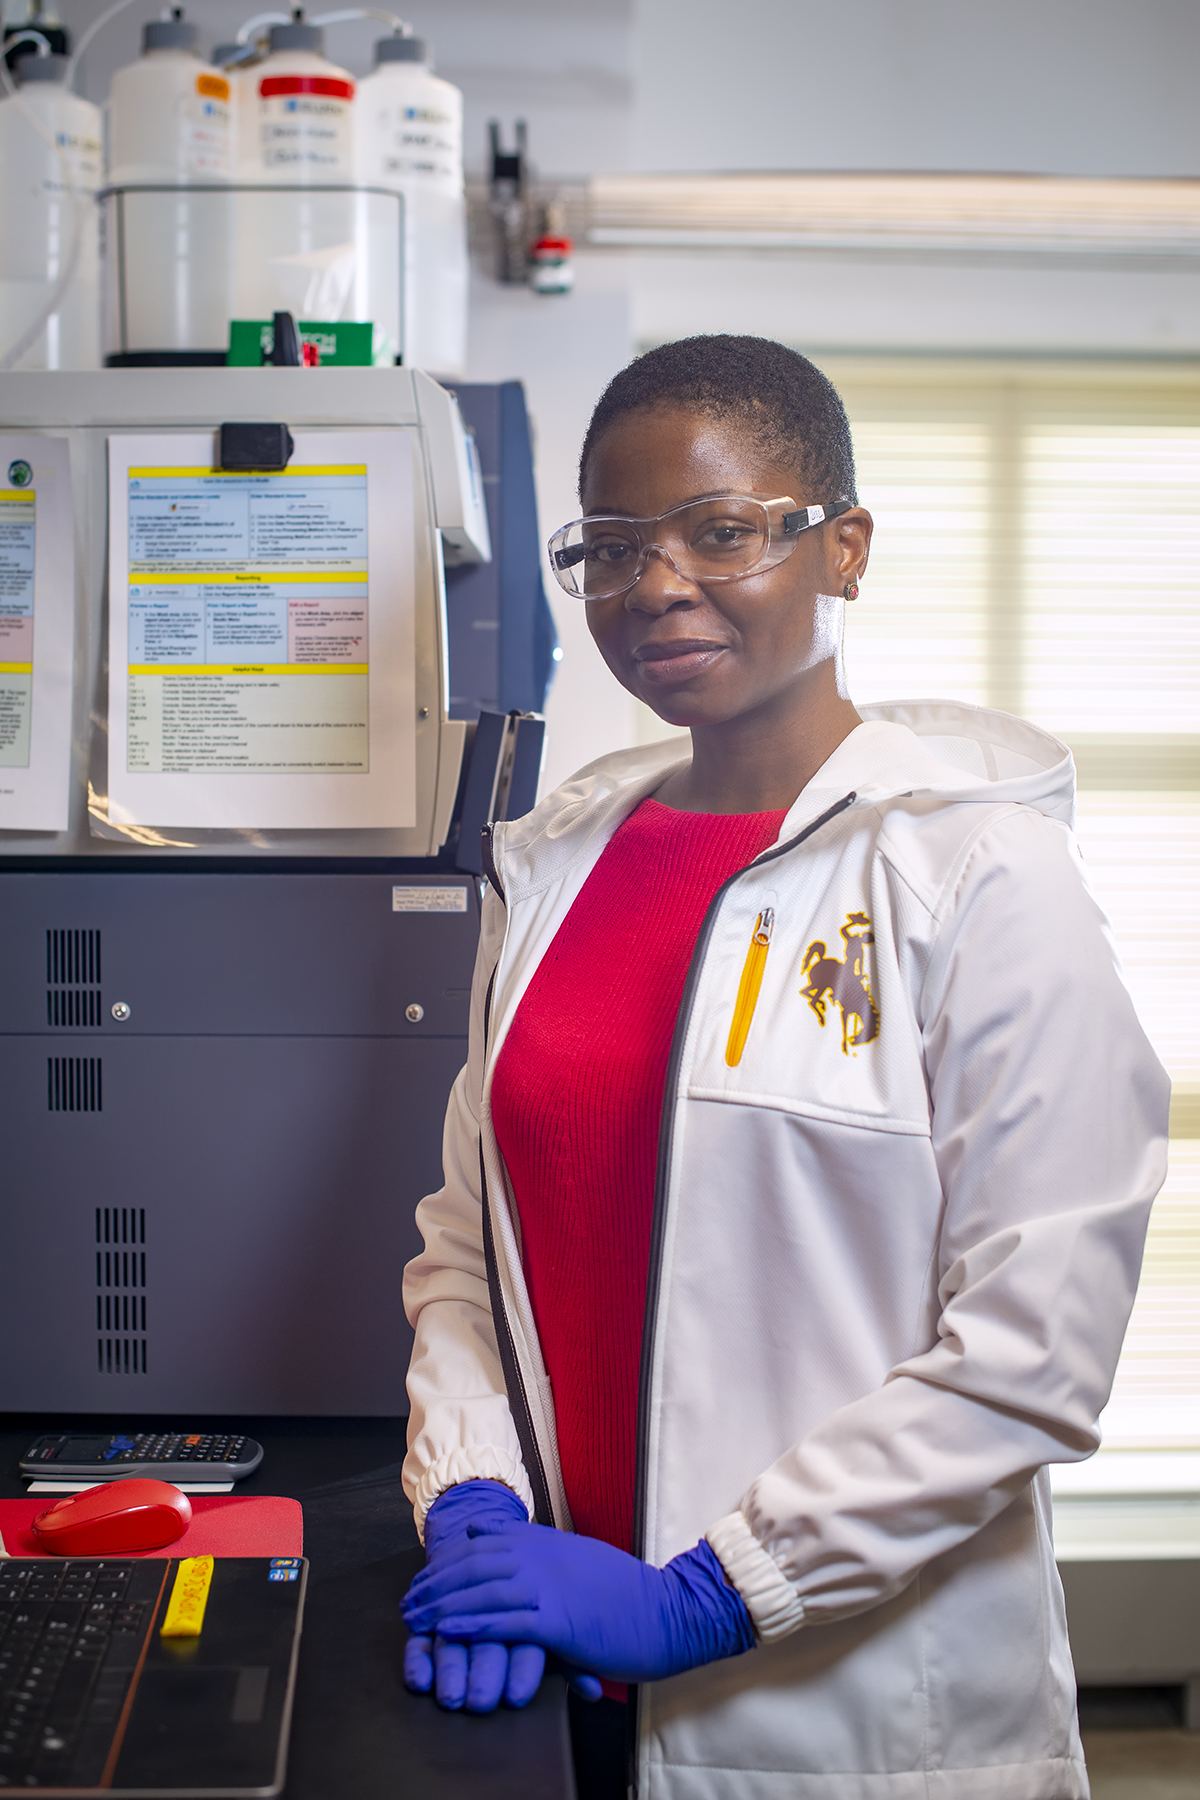 Alero Gure from Nigeria works in the Geochemistry Analytical Laboratory in the Earth Sciences Building. She works with an Ion Chromatographic System and switches out sample loops that analyze anions, specifically the oxychlorine species that Alero is studying. The purpose of her research is how certain oxidized compounds are formed on the surface of Mars by photoelectrochemical processes. 